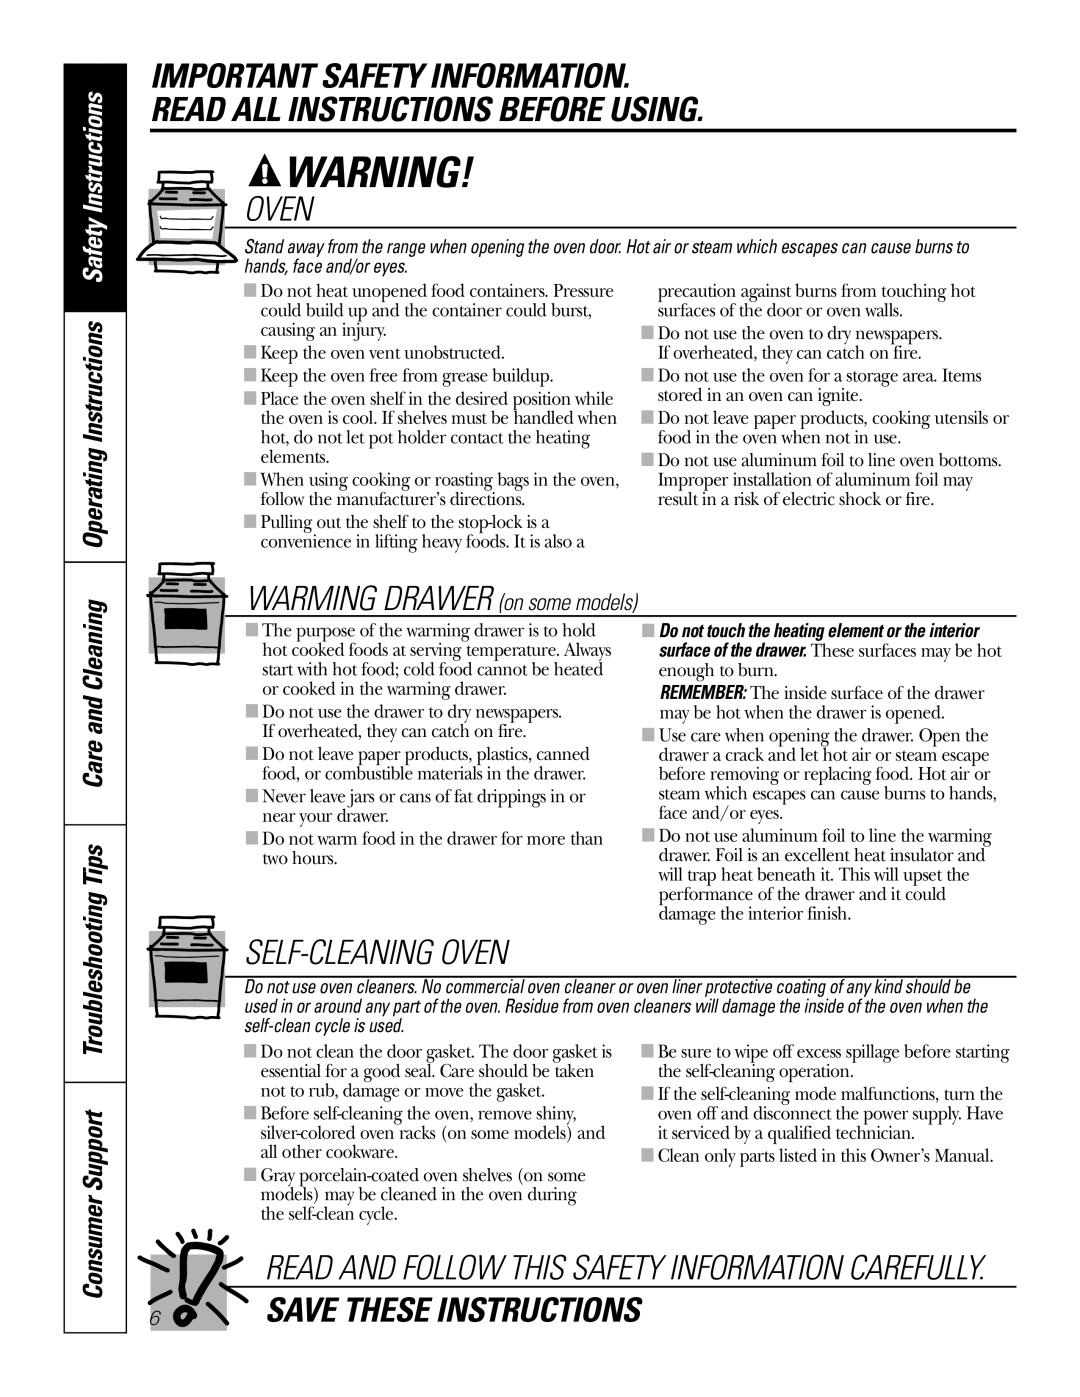 GE JB730 Oven, Safety Instructions, Troubleshooting Tips Care and Cleaning, Save These Instructions, Consumer Support 